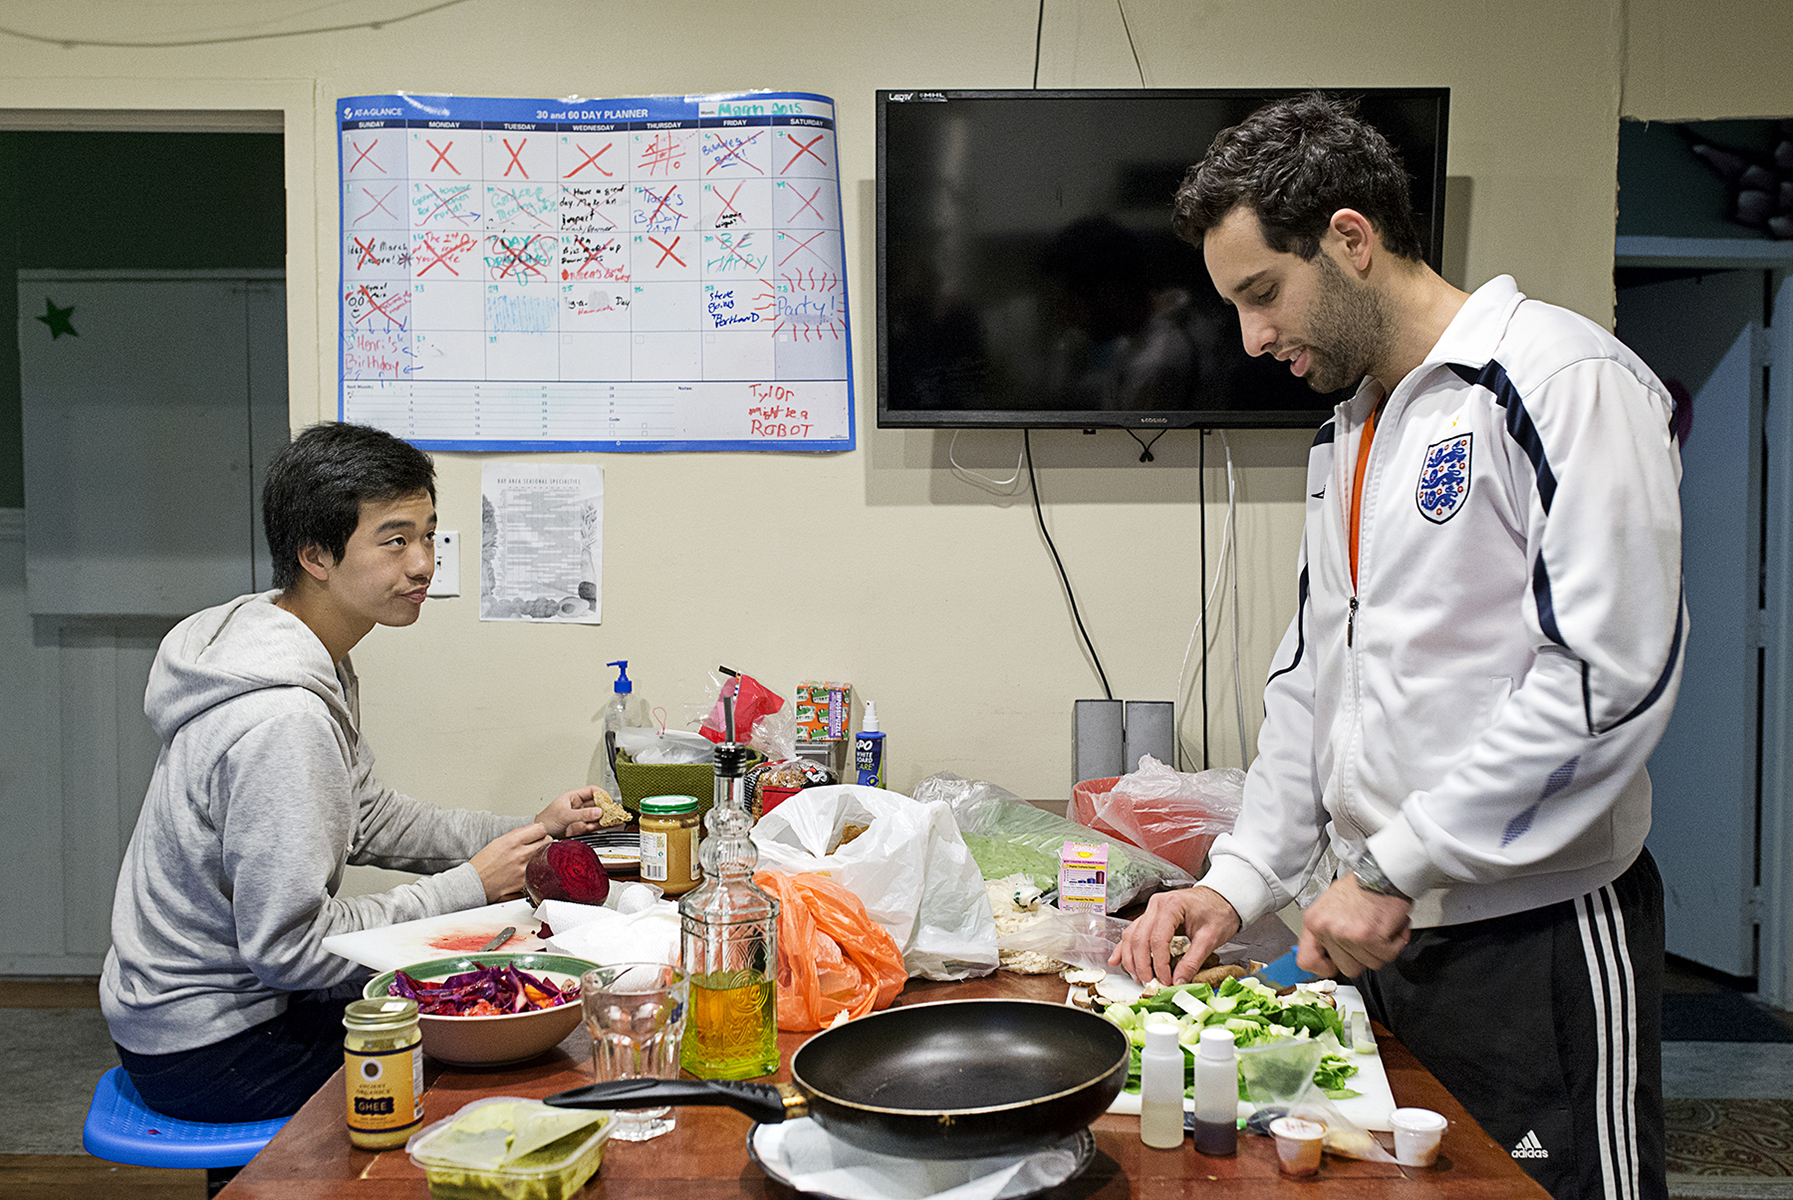 Lior Neu-ner (right) cooks while his housemate Darren Lee eats dinner in the communal kitchen at 20 Mission, a co-living house, in San Francisco, Calif., on Monday, March 23, 2015. Around 45 people live in the building, which is a former single room occupancy hotel that had been vacant for several years before being turned into the co-living space. Many of the residents are start-up entrepreneurs and the community is a mix of temporary occupants with people who have made the space their home on a more long-term basis. Neu-ner was living at 20 Mission for a few months while in San Francisco to participate in a start-up accelerator with his parking app Parko and Lee lived in the house temporarily while transitioning to the city.